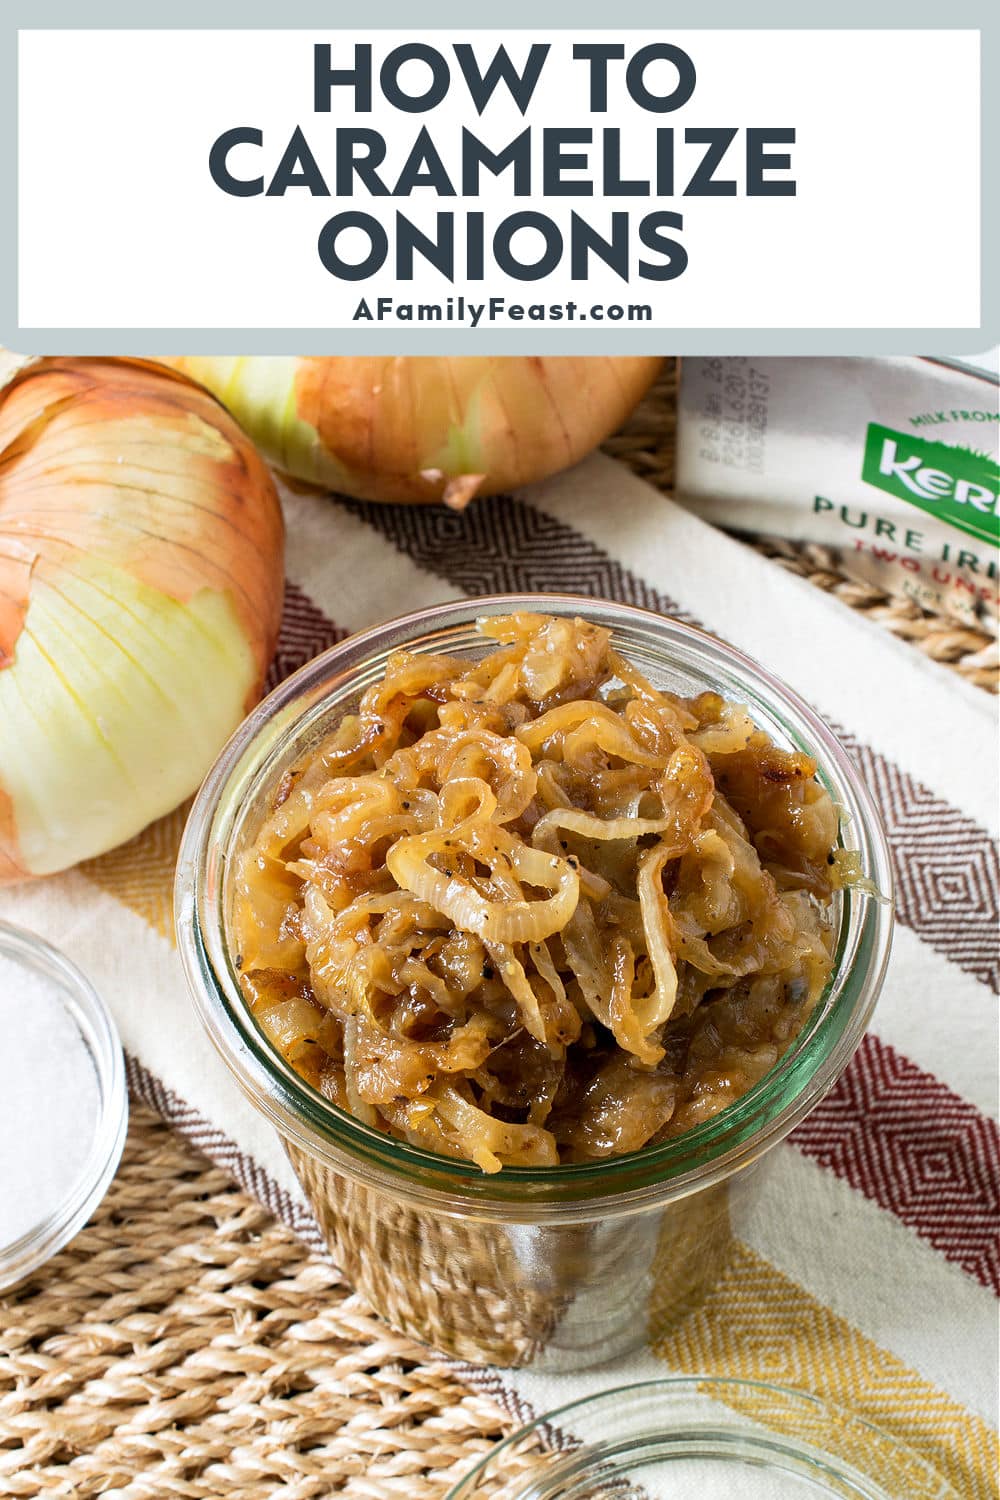 How to Make Caramelized Onions - A Family Feast